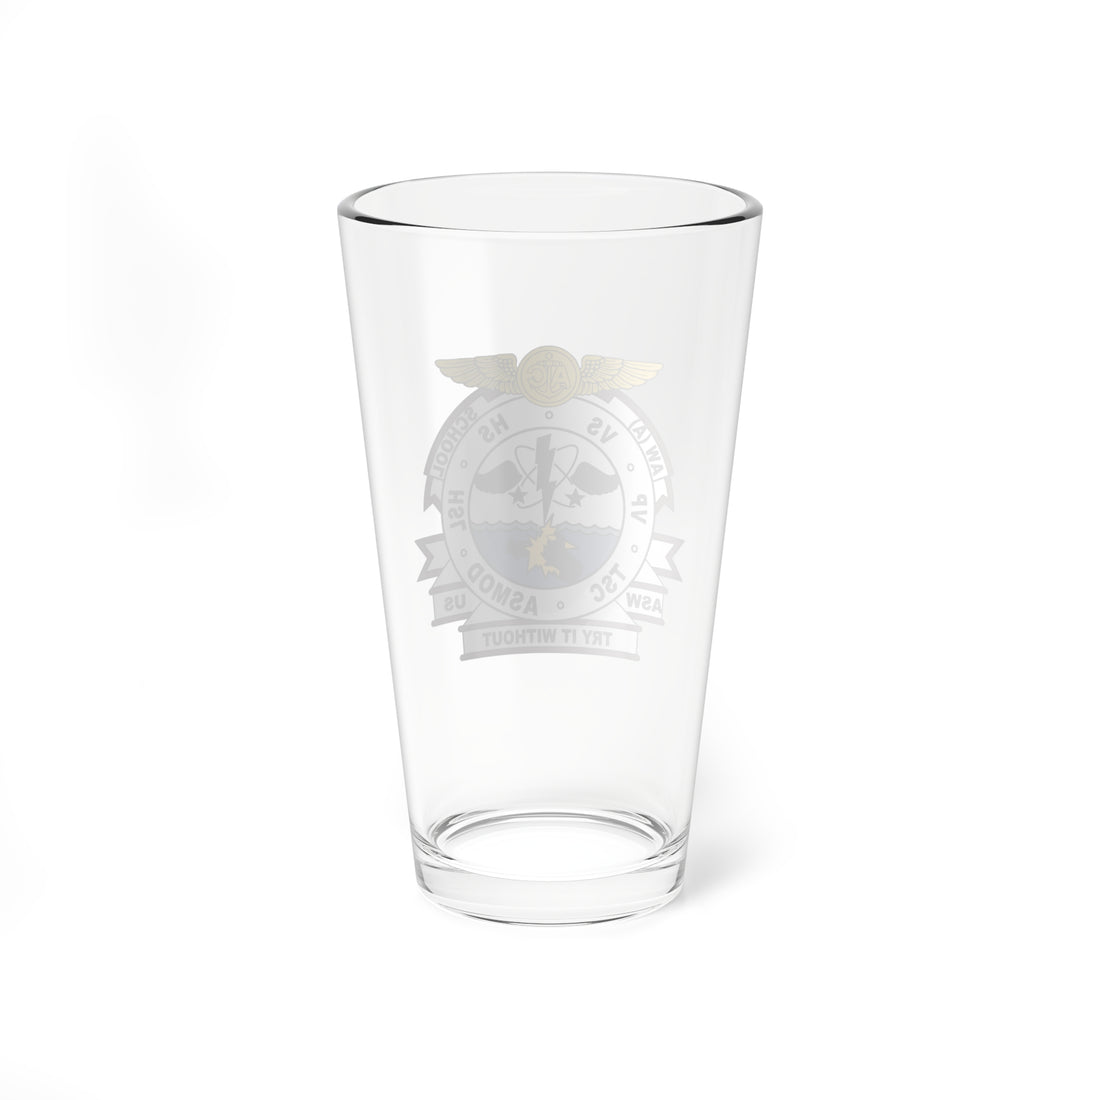 AW(A) School Pint Glass, US Navy Aviation Warfare Systems Operator Advance Training School from late 1990's to early 2000's